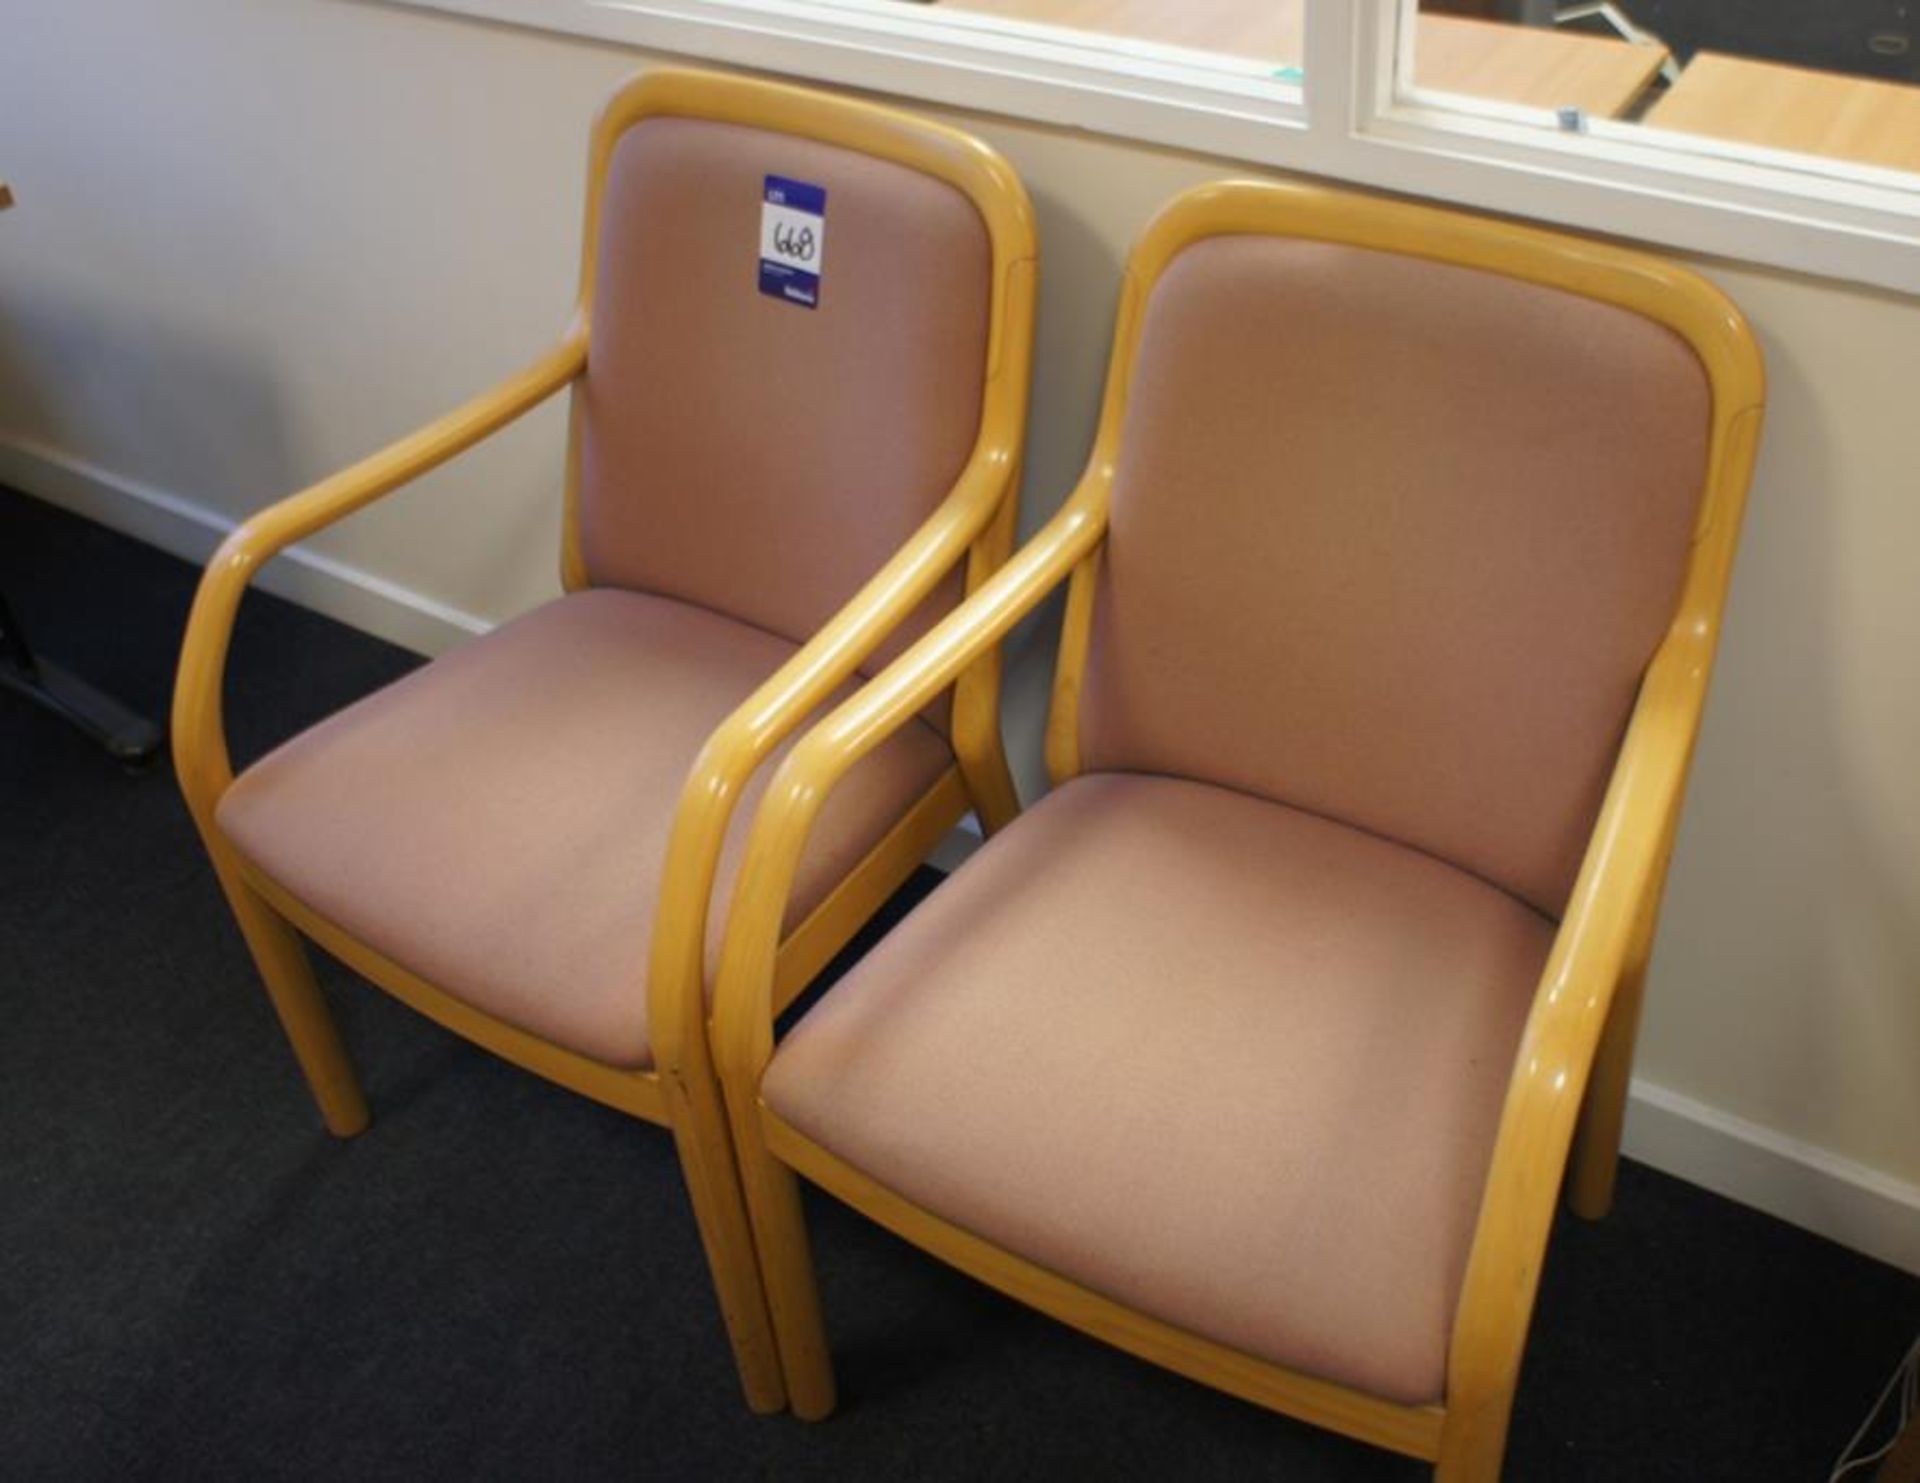 * 7 Upholstered Reception Chairs Photographs are provided for example purposes only and do not - Image 3 of 3